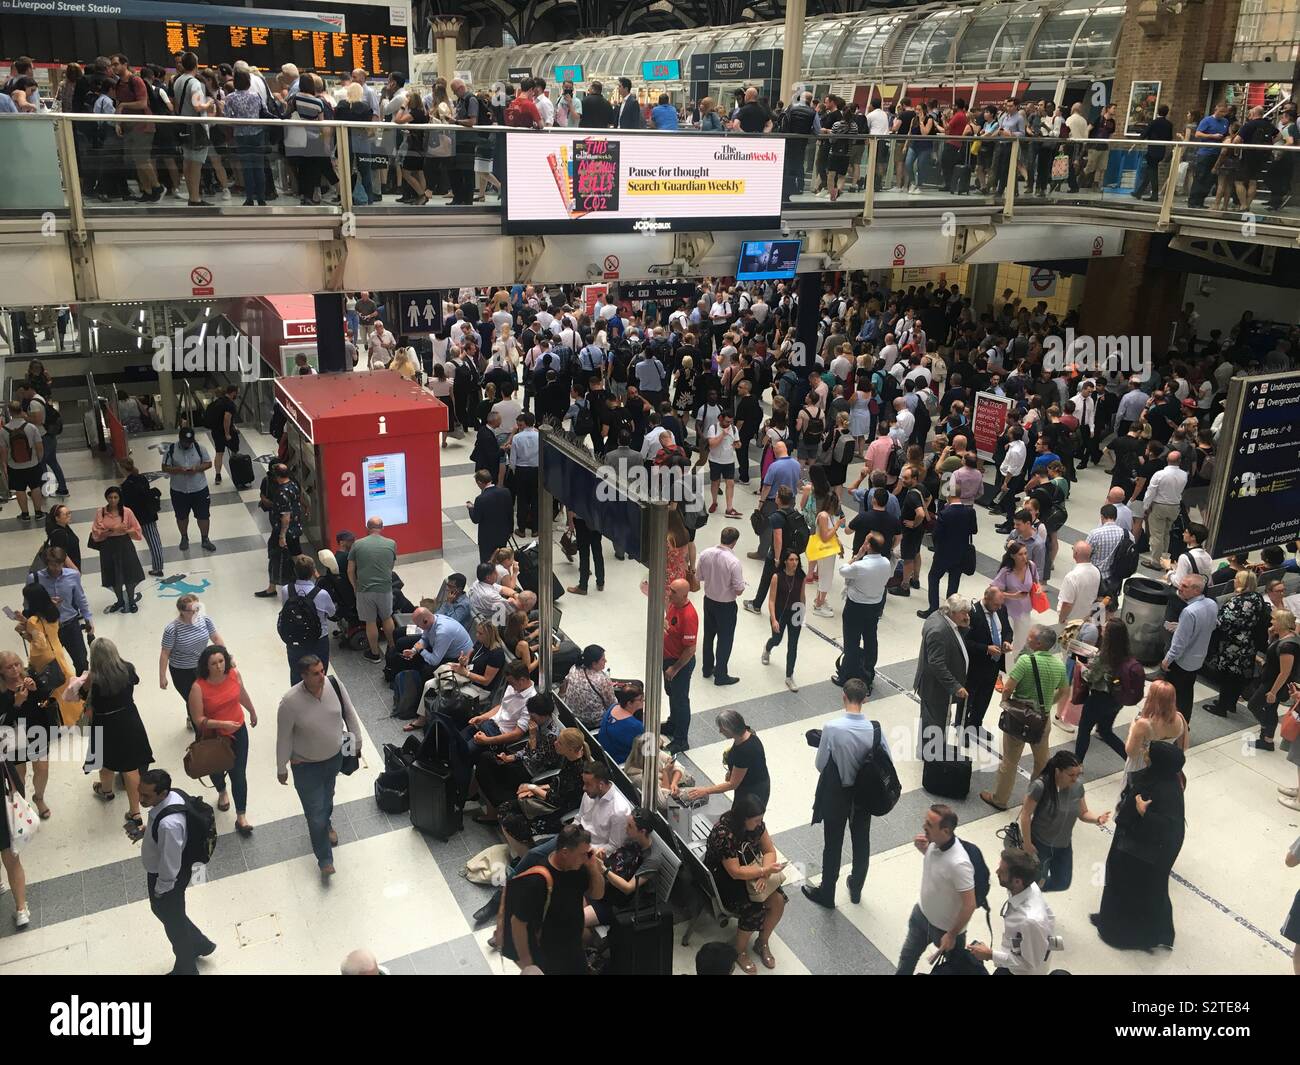 Liverpool Street Station, 26th July at 5.45pm Stock Photo